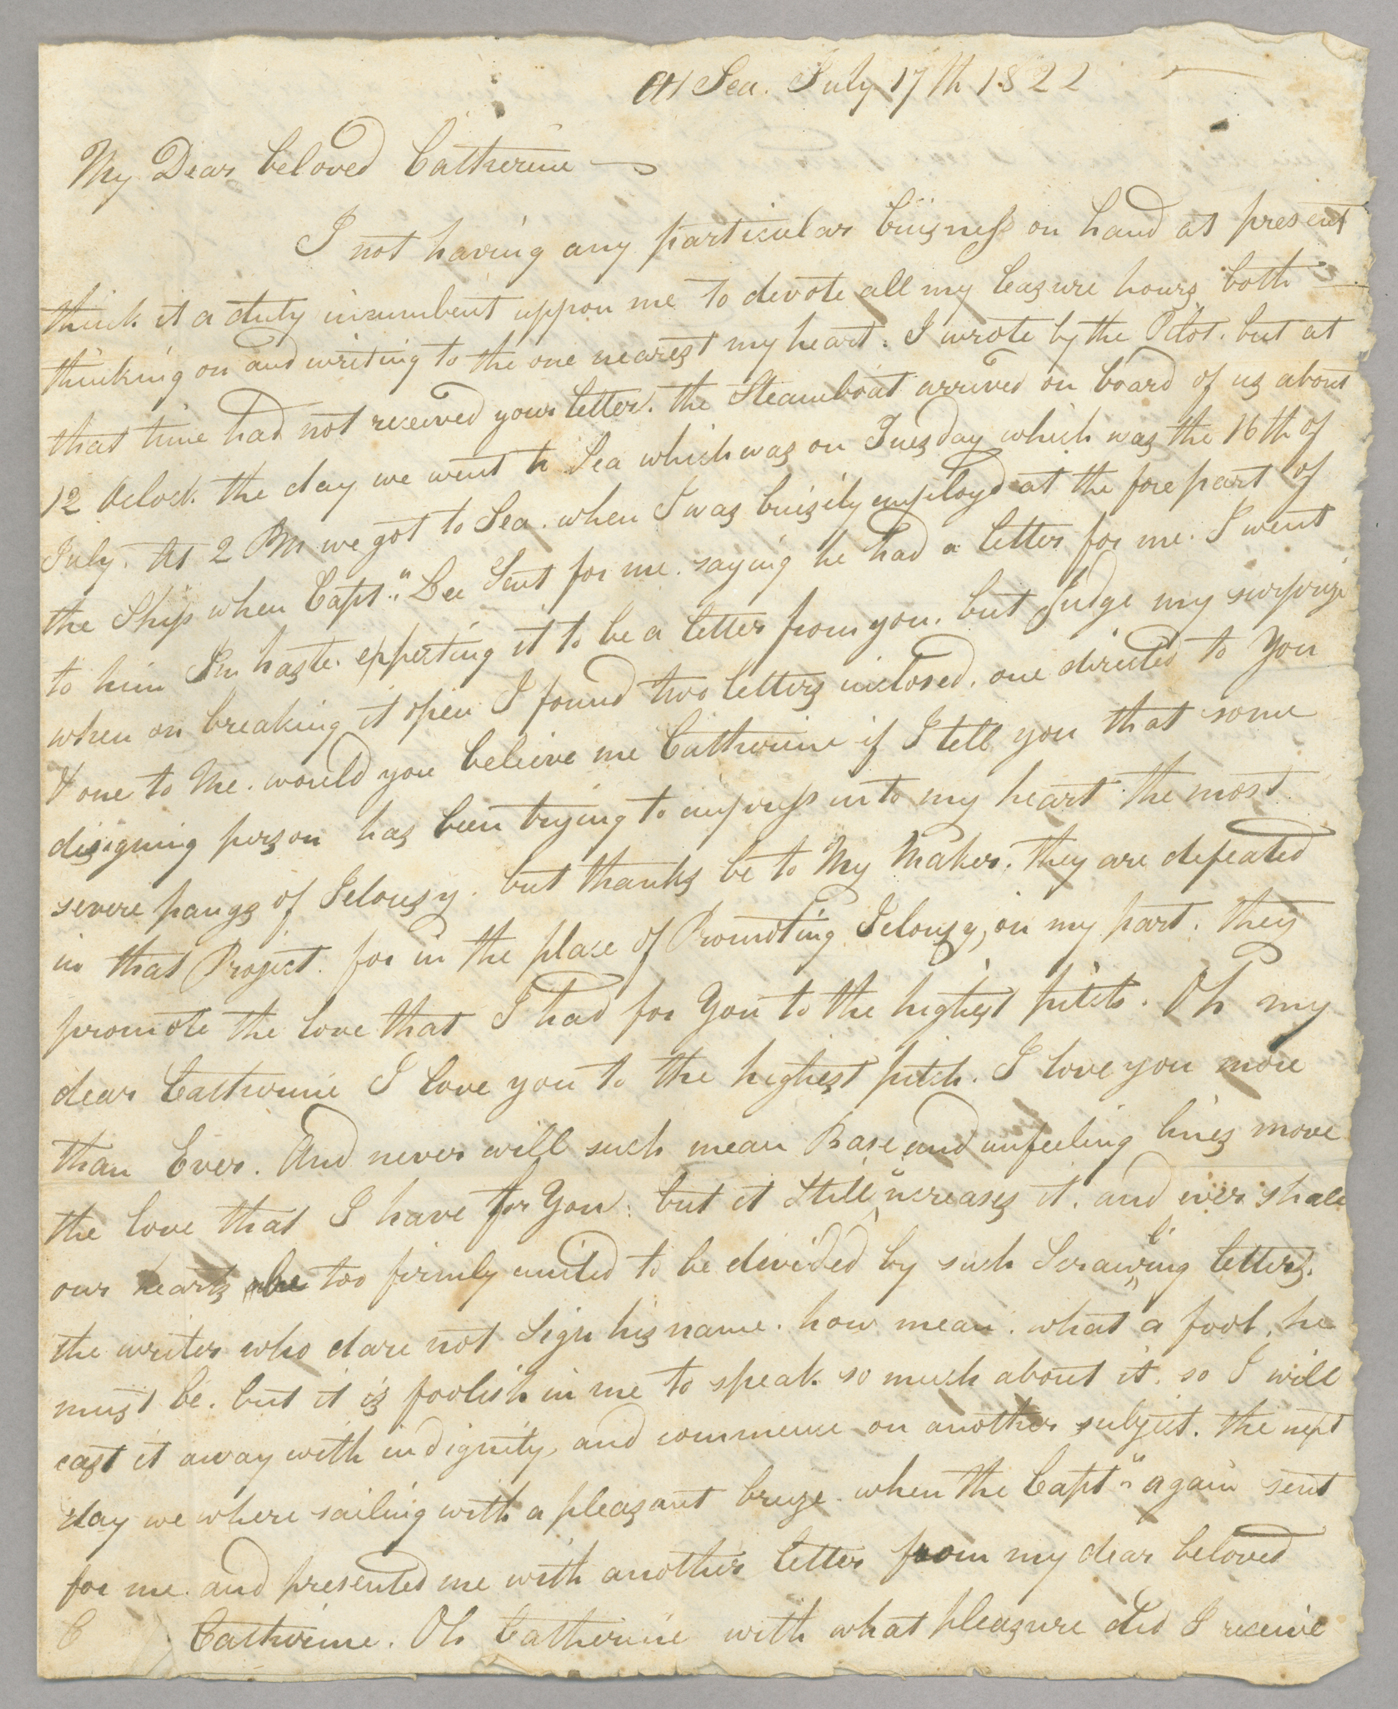 Letter, [Hewlett Townsend Coles], at sea, to "My Dear Beloved Catherine," [Catherine Van Suydam Coles], n.p., Page 1